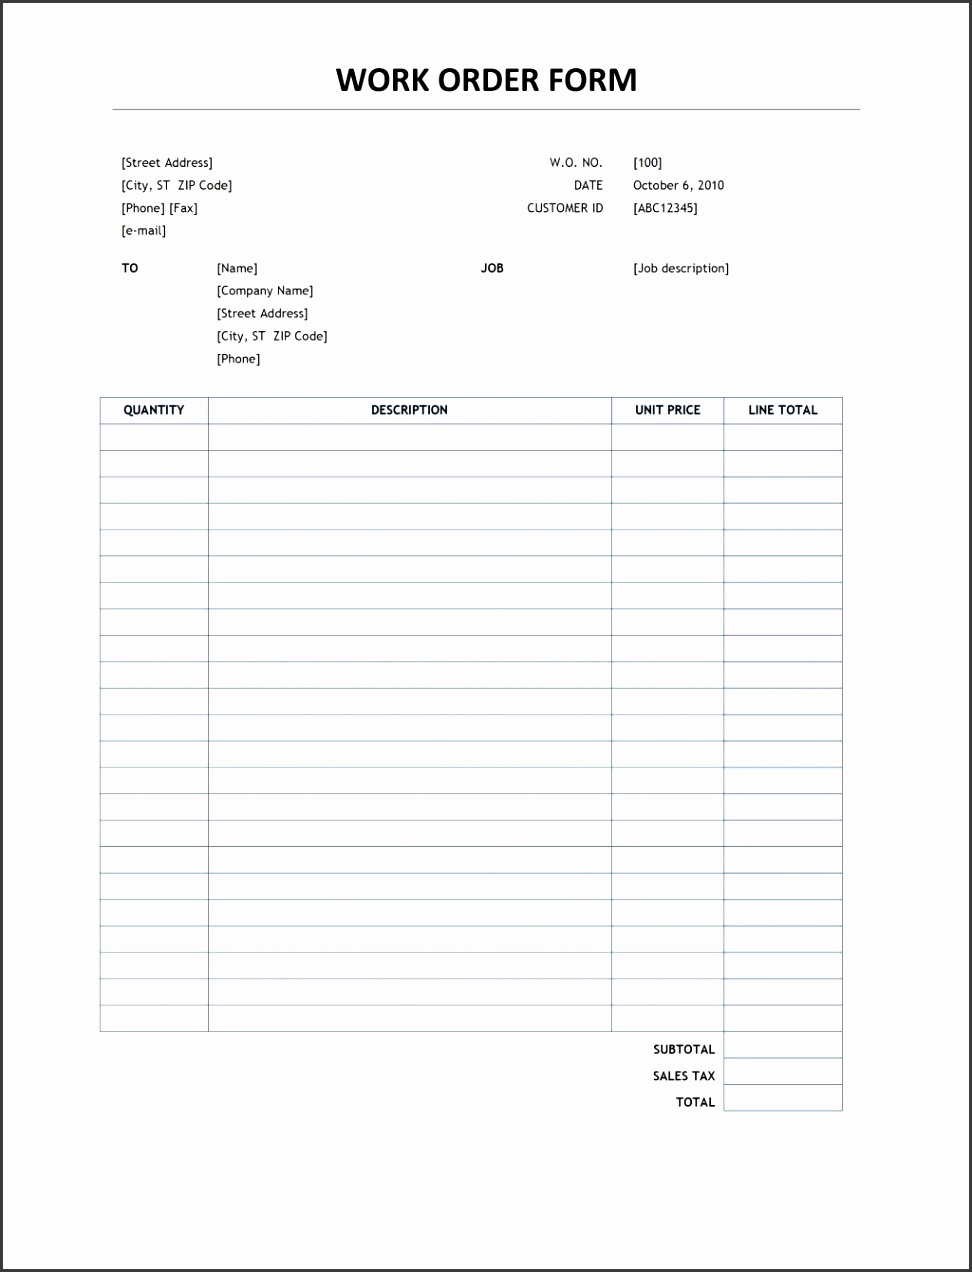 work order form template for microsoft word format vlashed 1024x1326